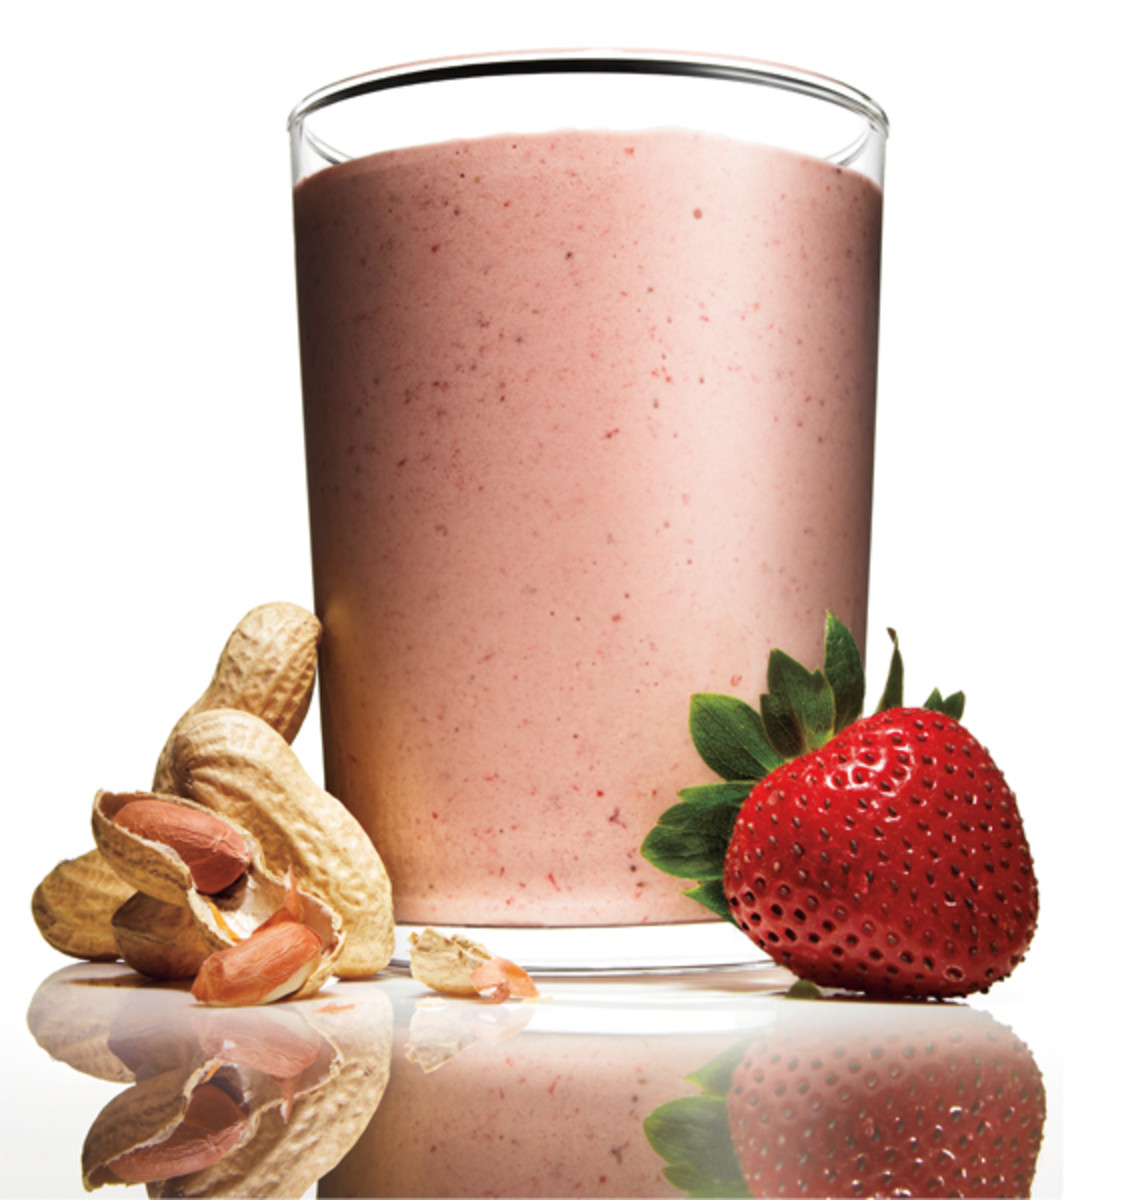 6 delicious protein smoothies for weight loss to drink after gym